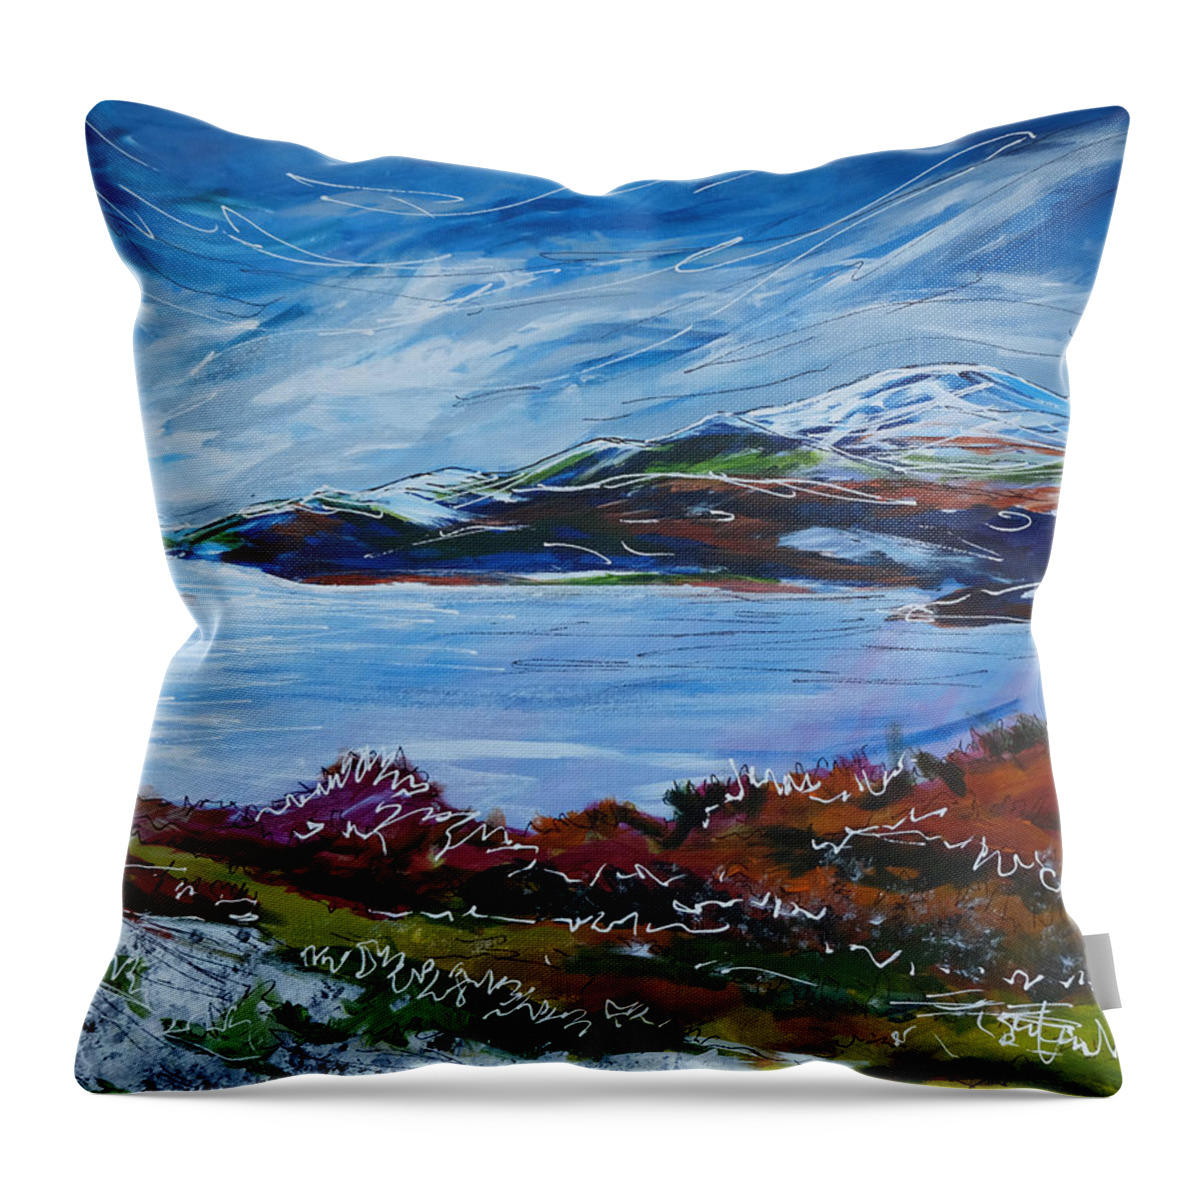 Mawwdach Estuary Throw Pillow featuring the painting Mawwdach Estuary by Laura Hol Art